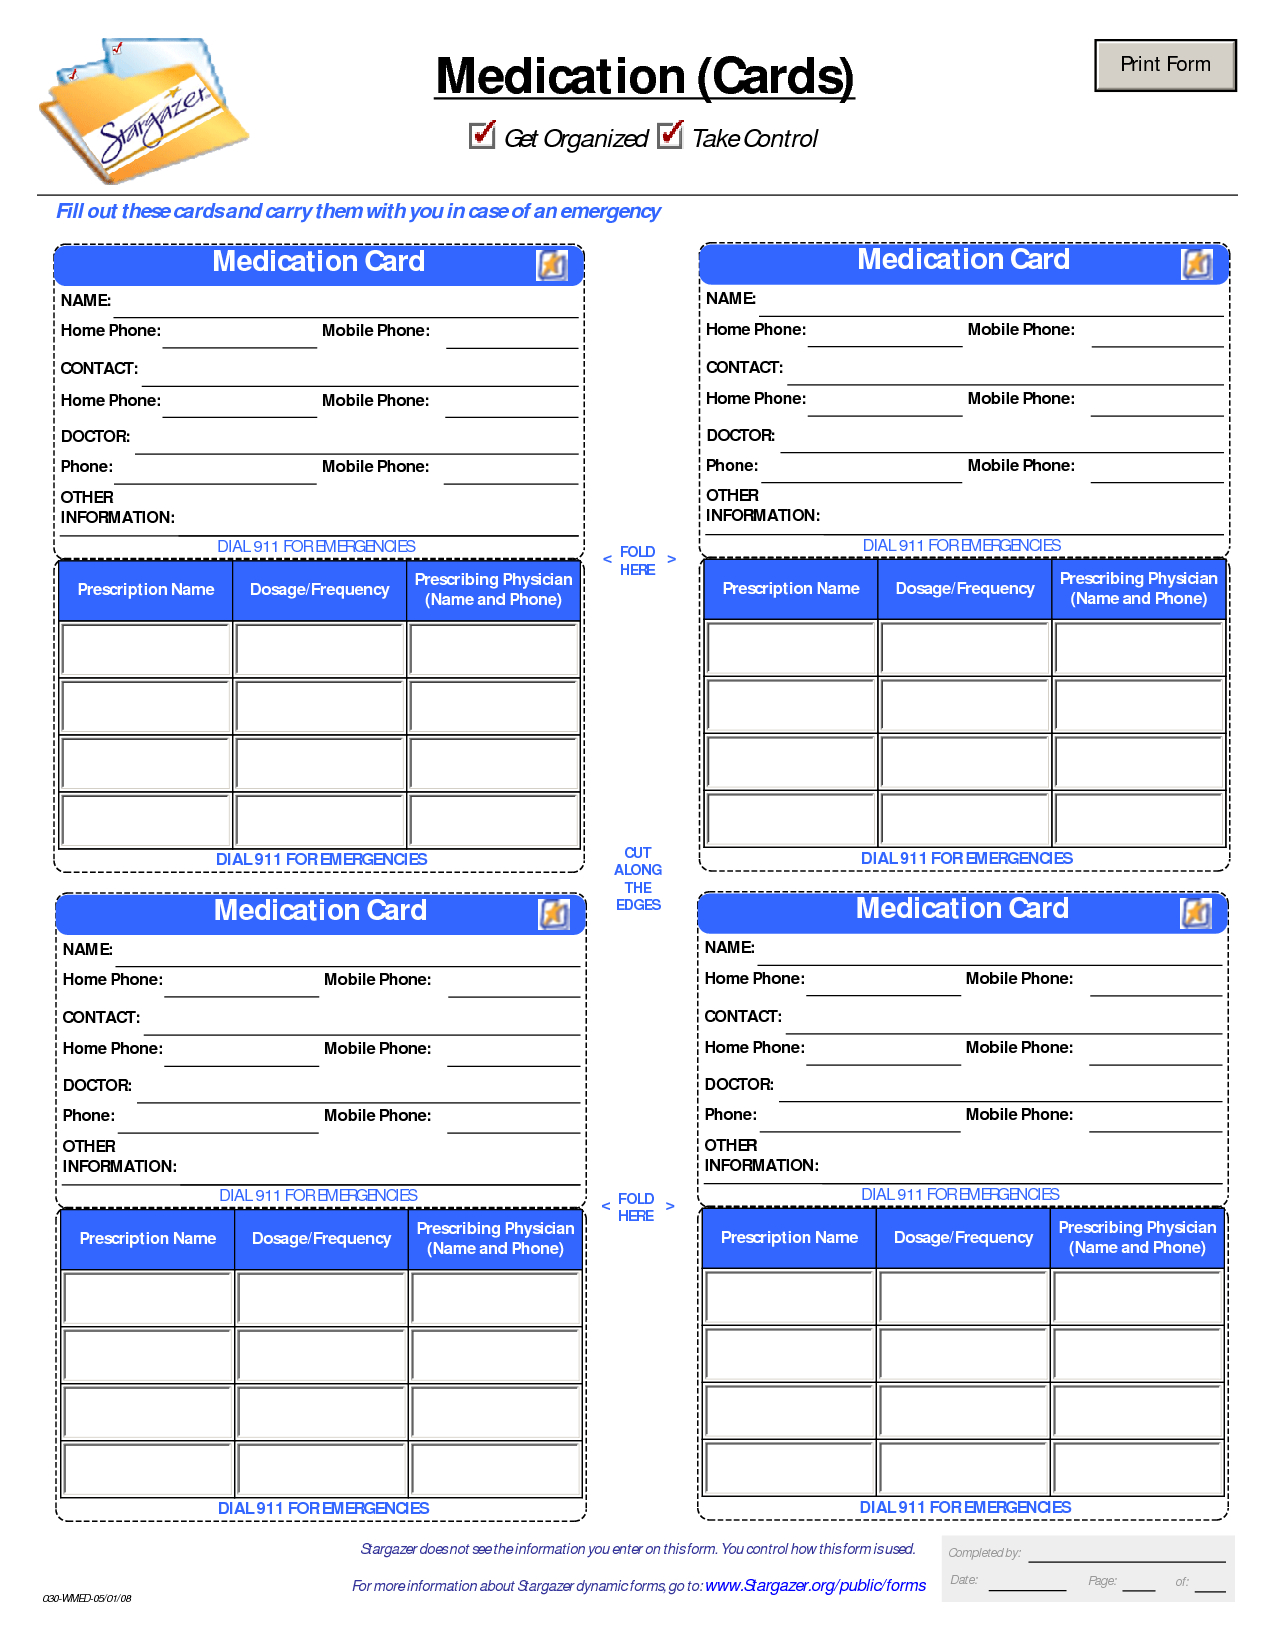 Patient Medication Card Template | Medication List, Medical Intended For In Case Of Emergency Card Template